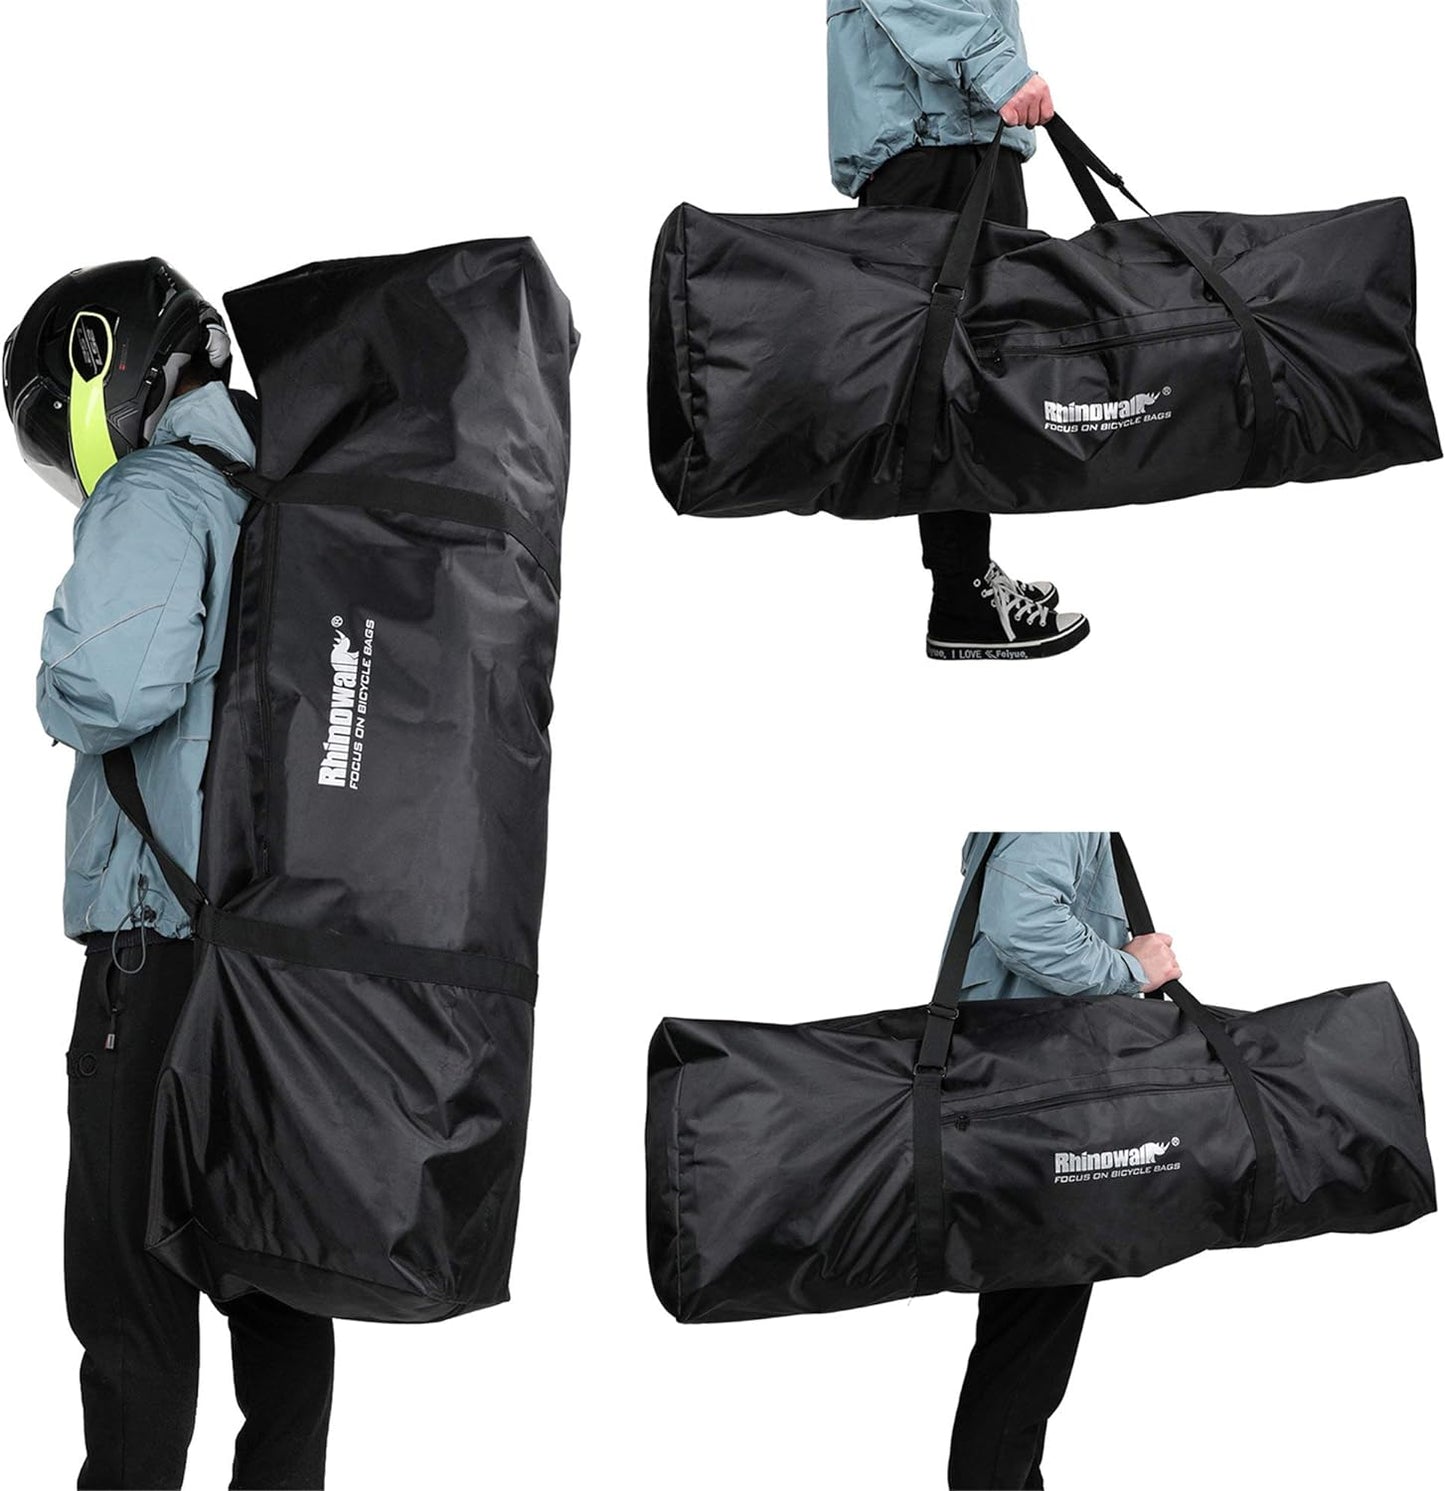 Rhinowalk E-scooter Electric Scooter Carrying Storage Bag